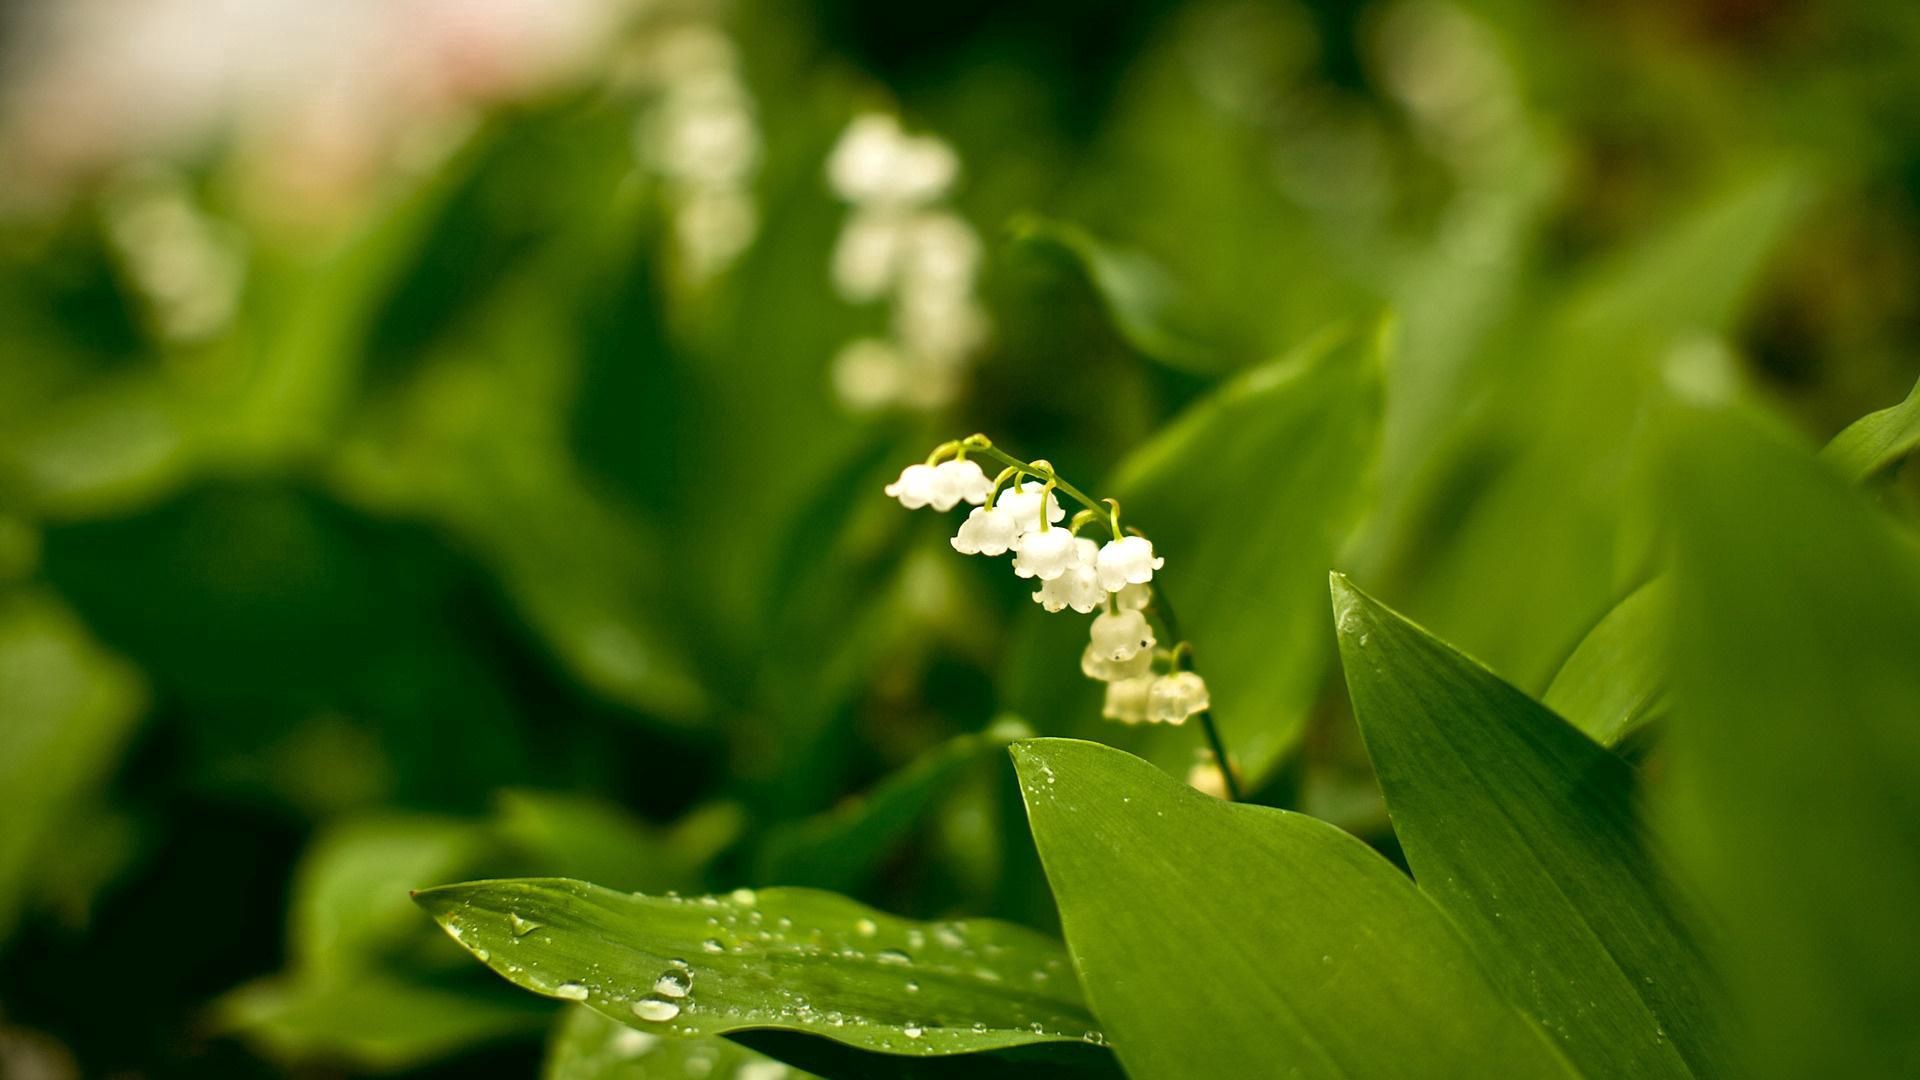 greens, lily of the valley, nature, flowers, forest, rarity